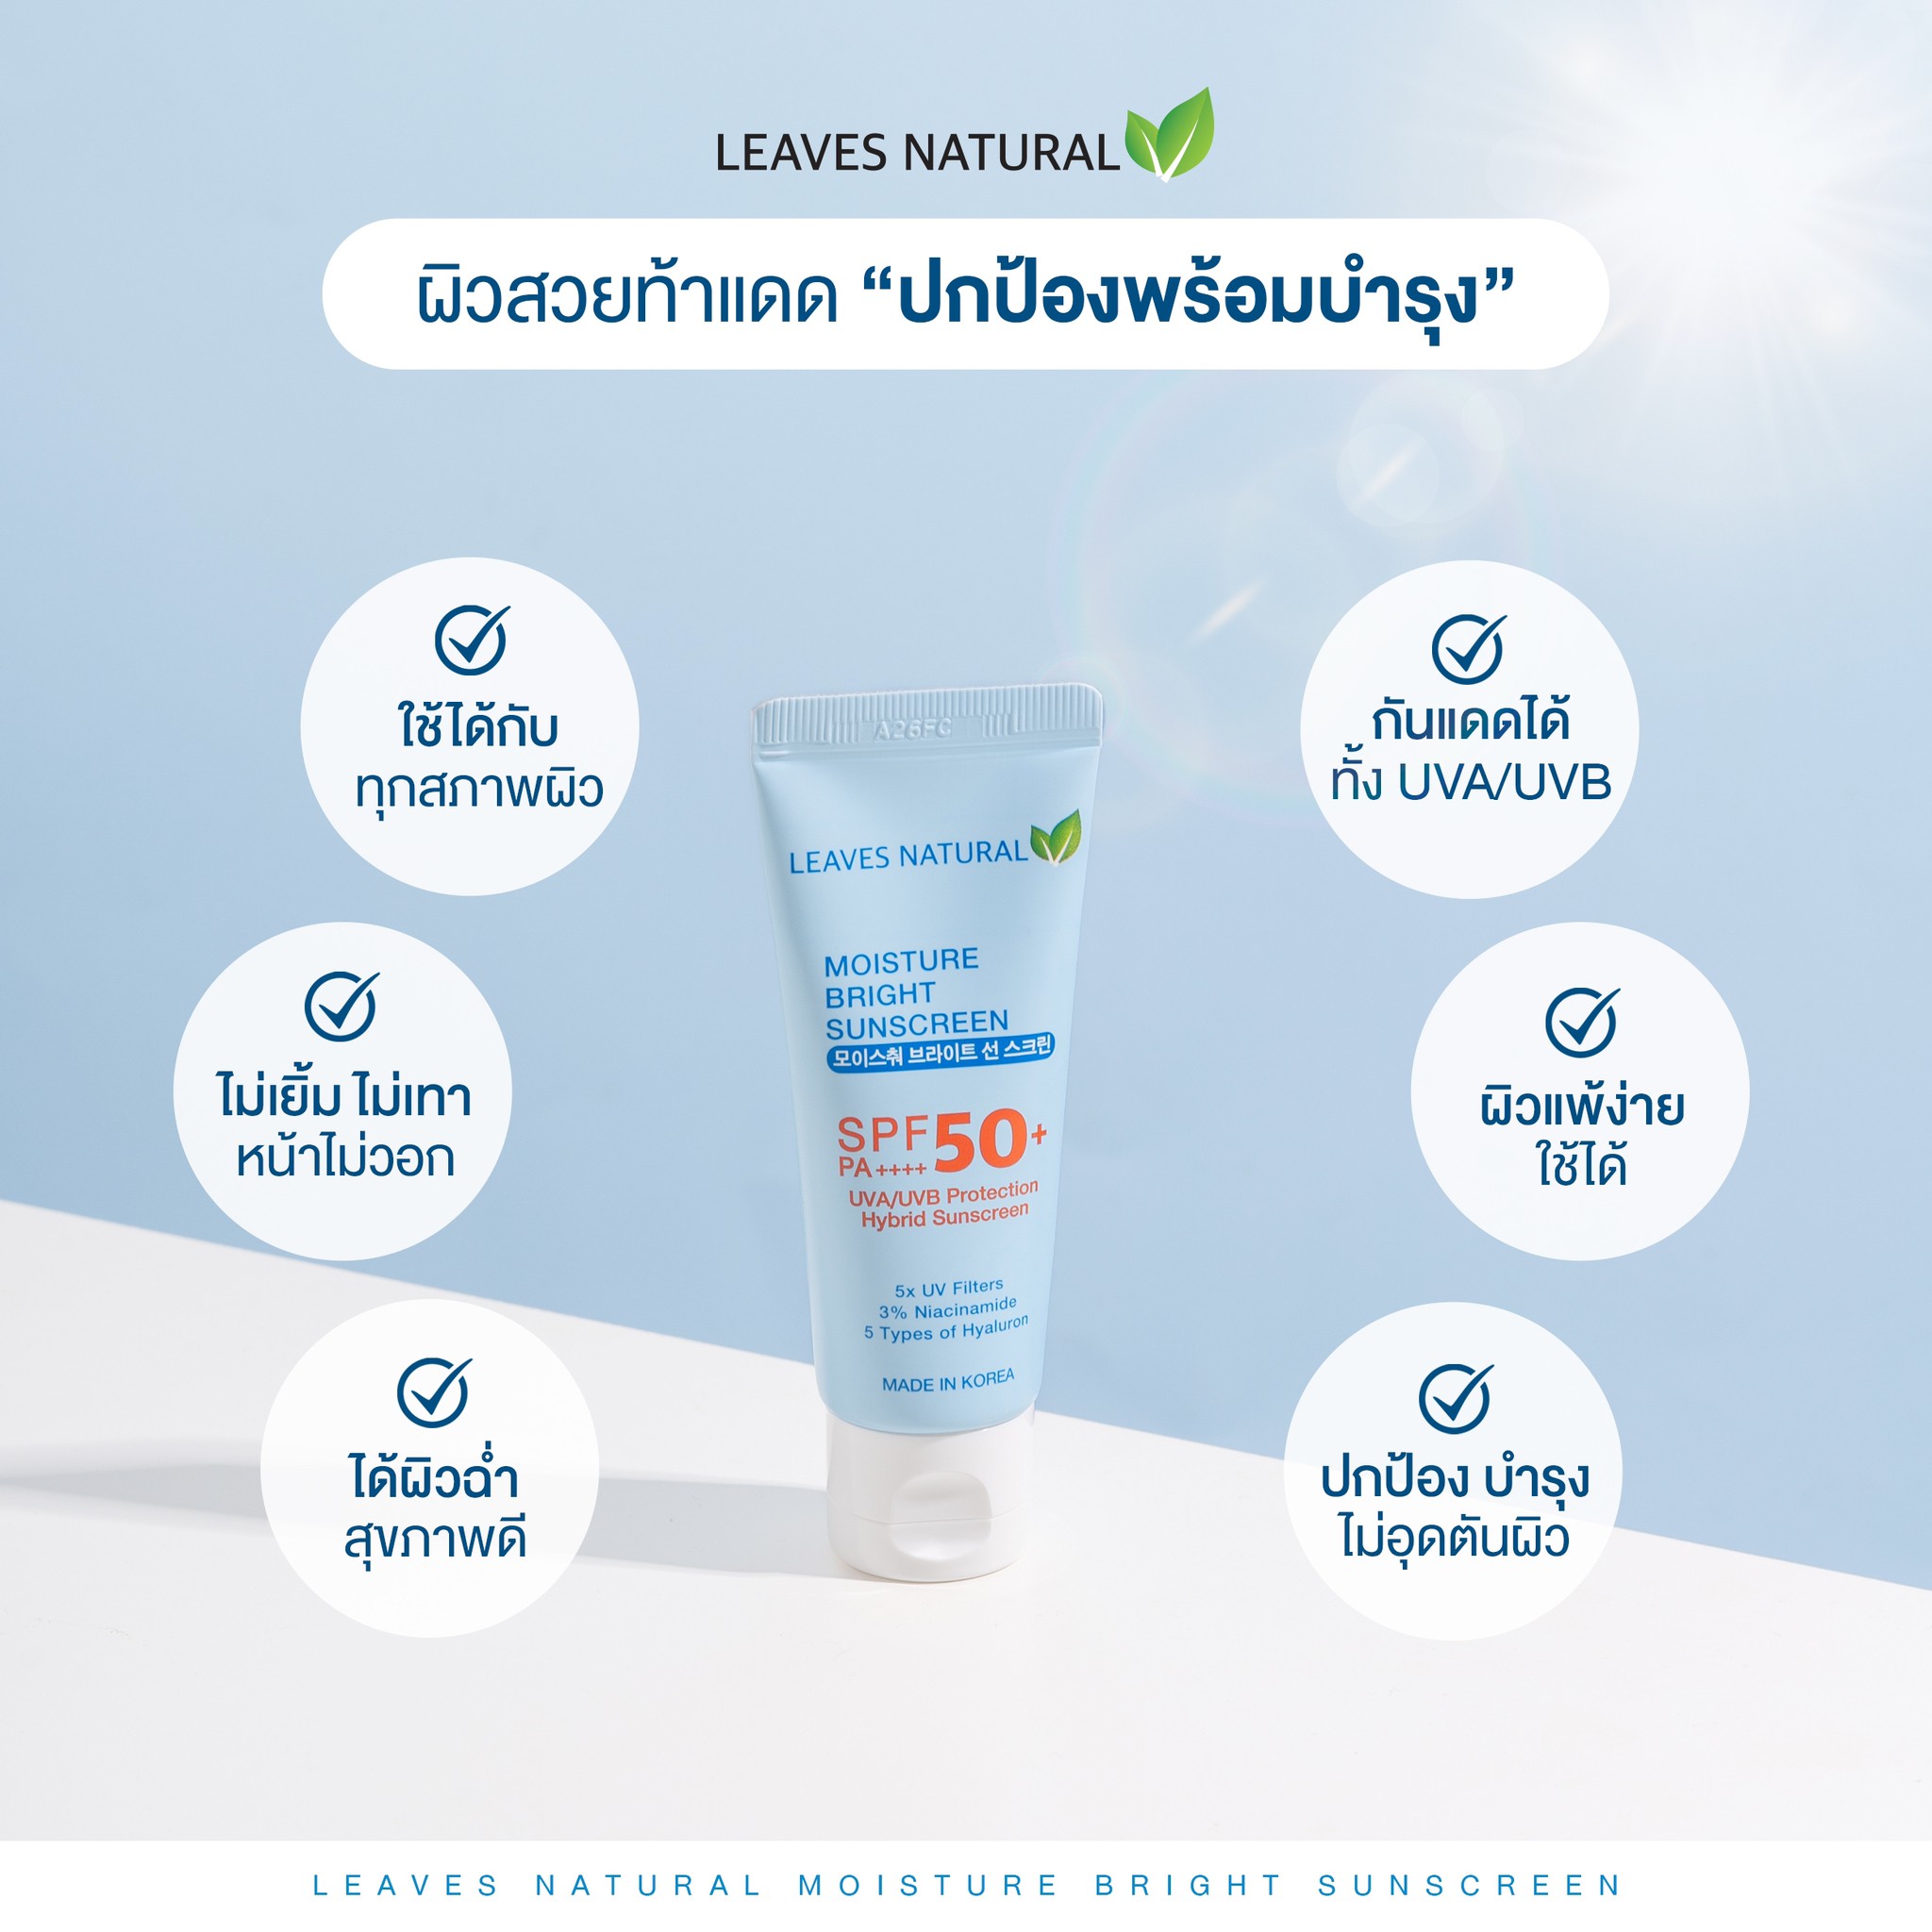 Leaves Natural Moisture Bright Sunscreen SPF50+ PA++++